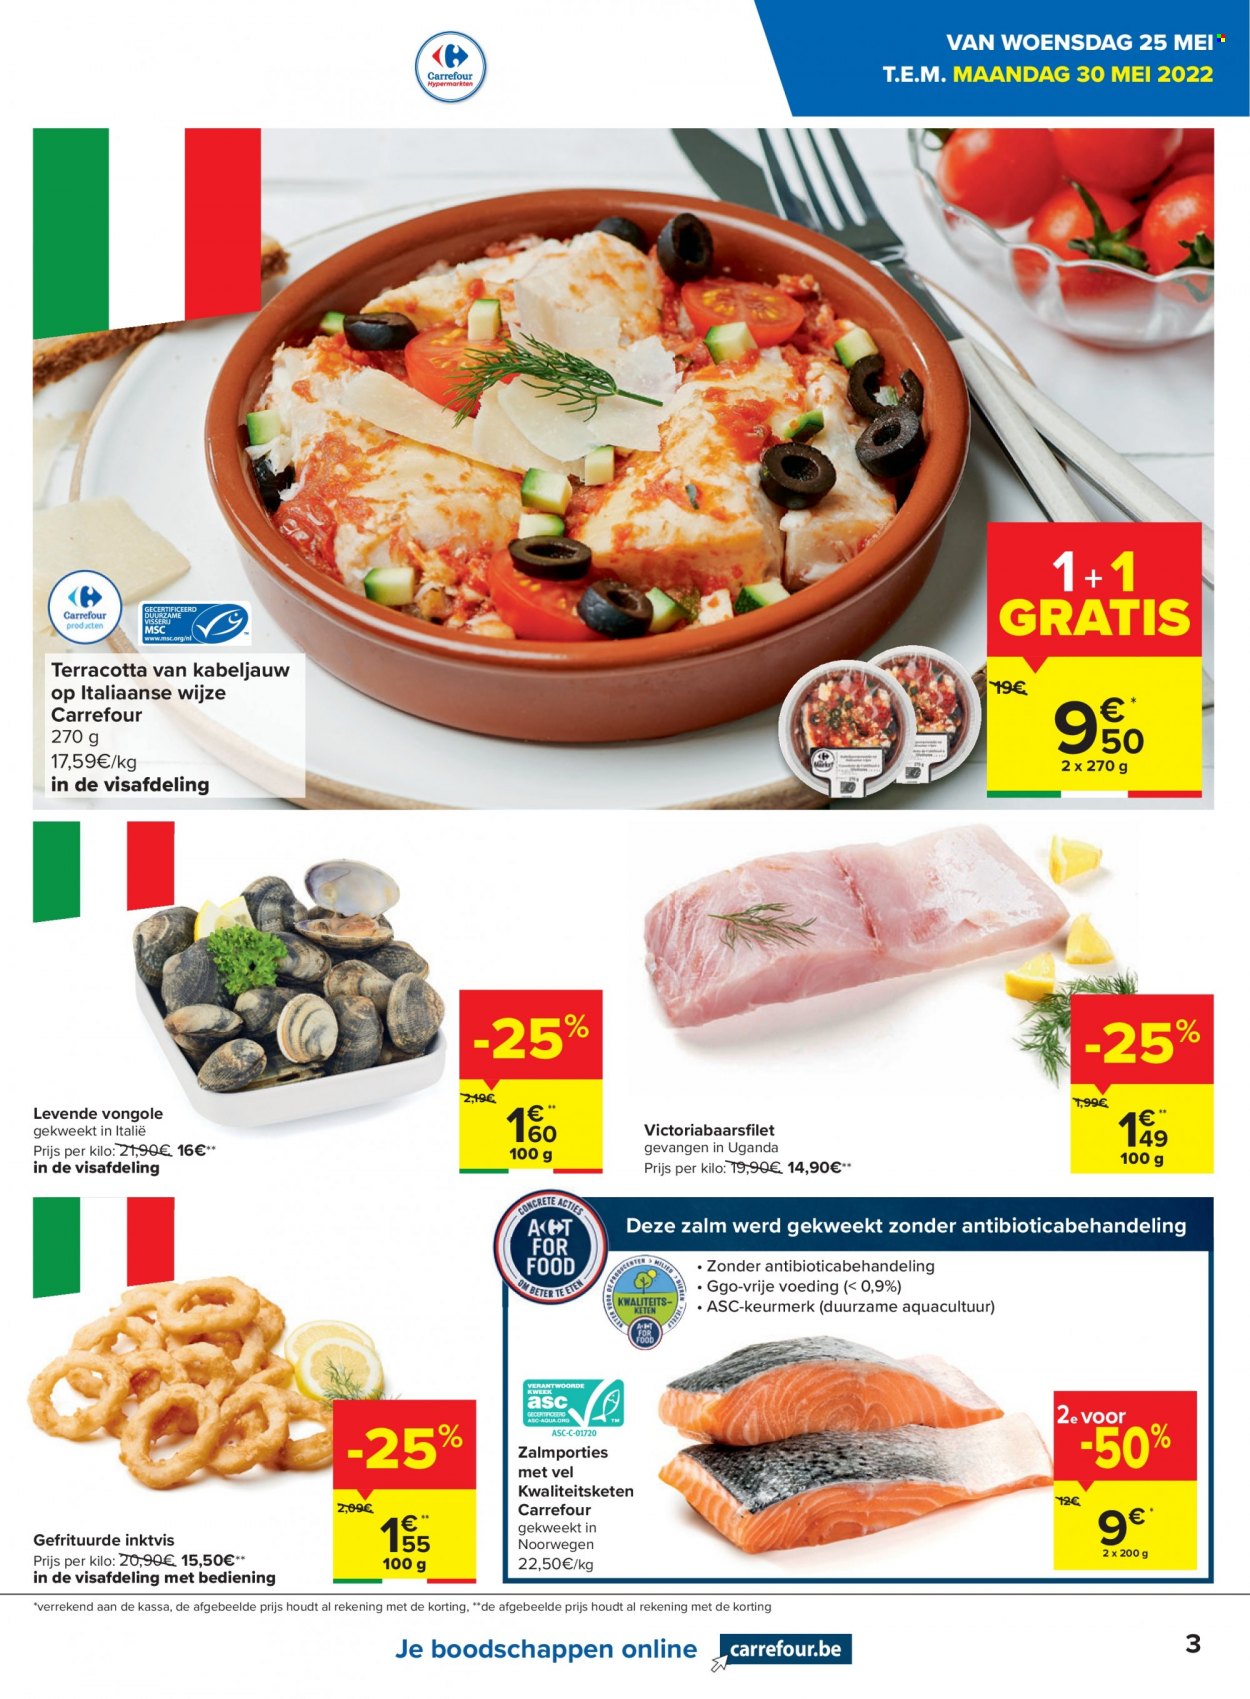 Catalogue Carrefour hypermarkt - 24.5.2022 - 30.5.2022. Page 3.